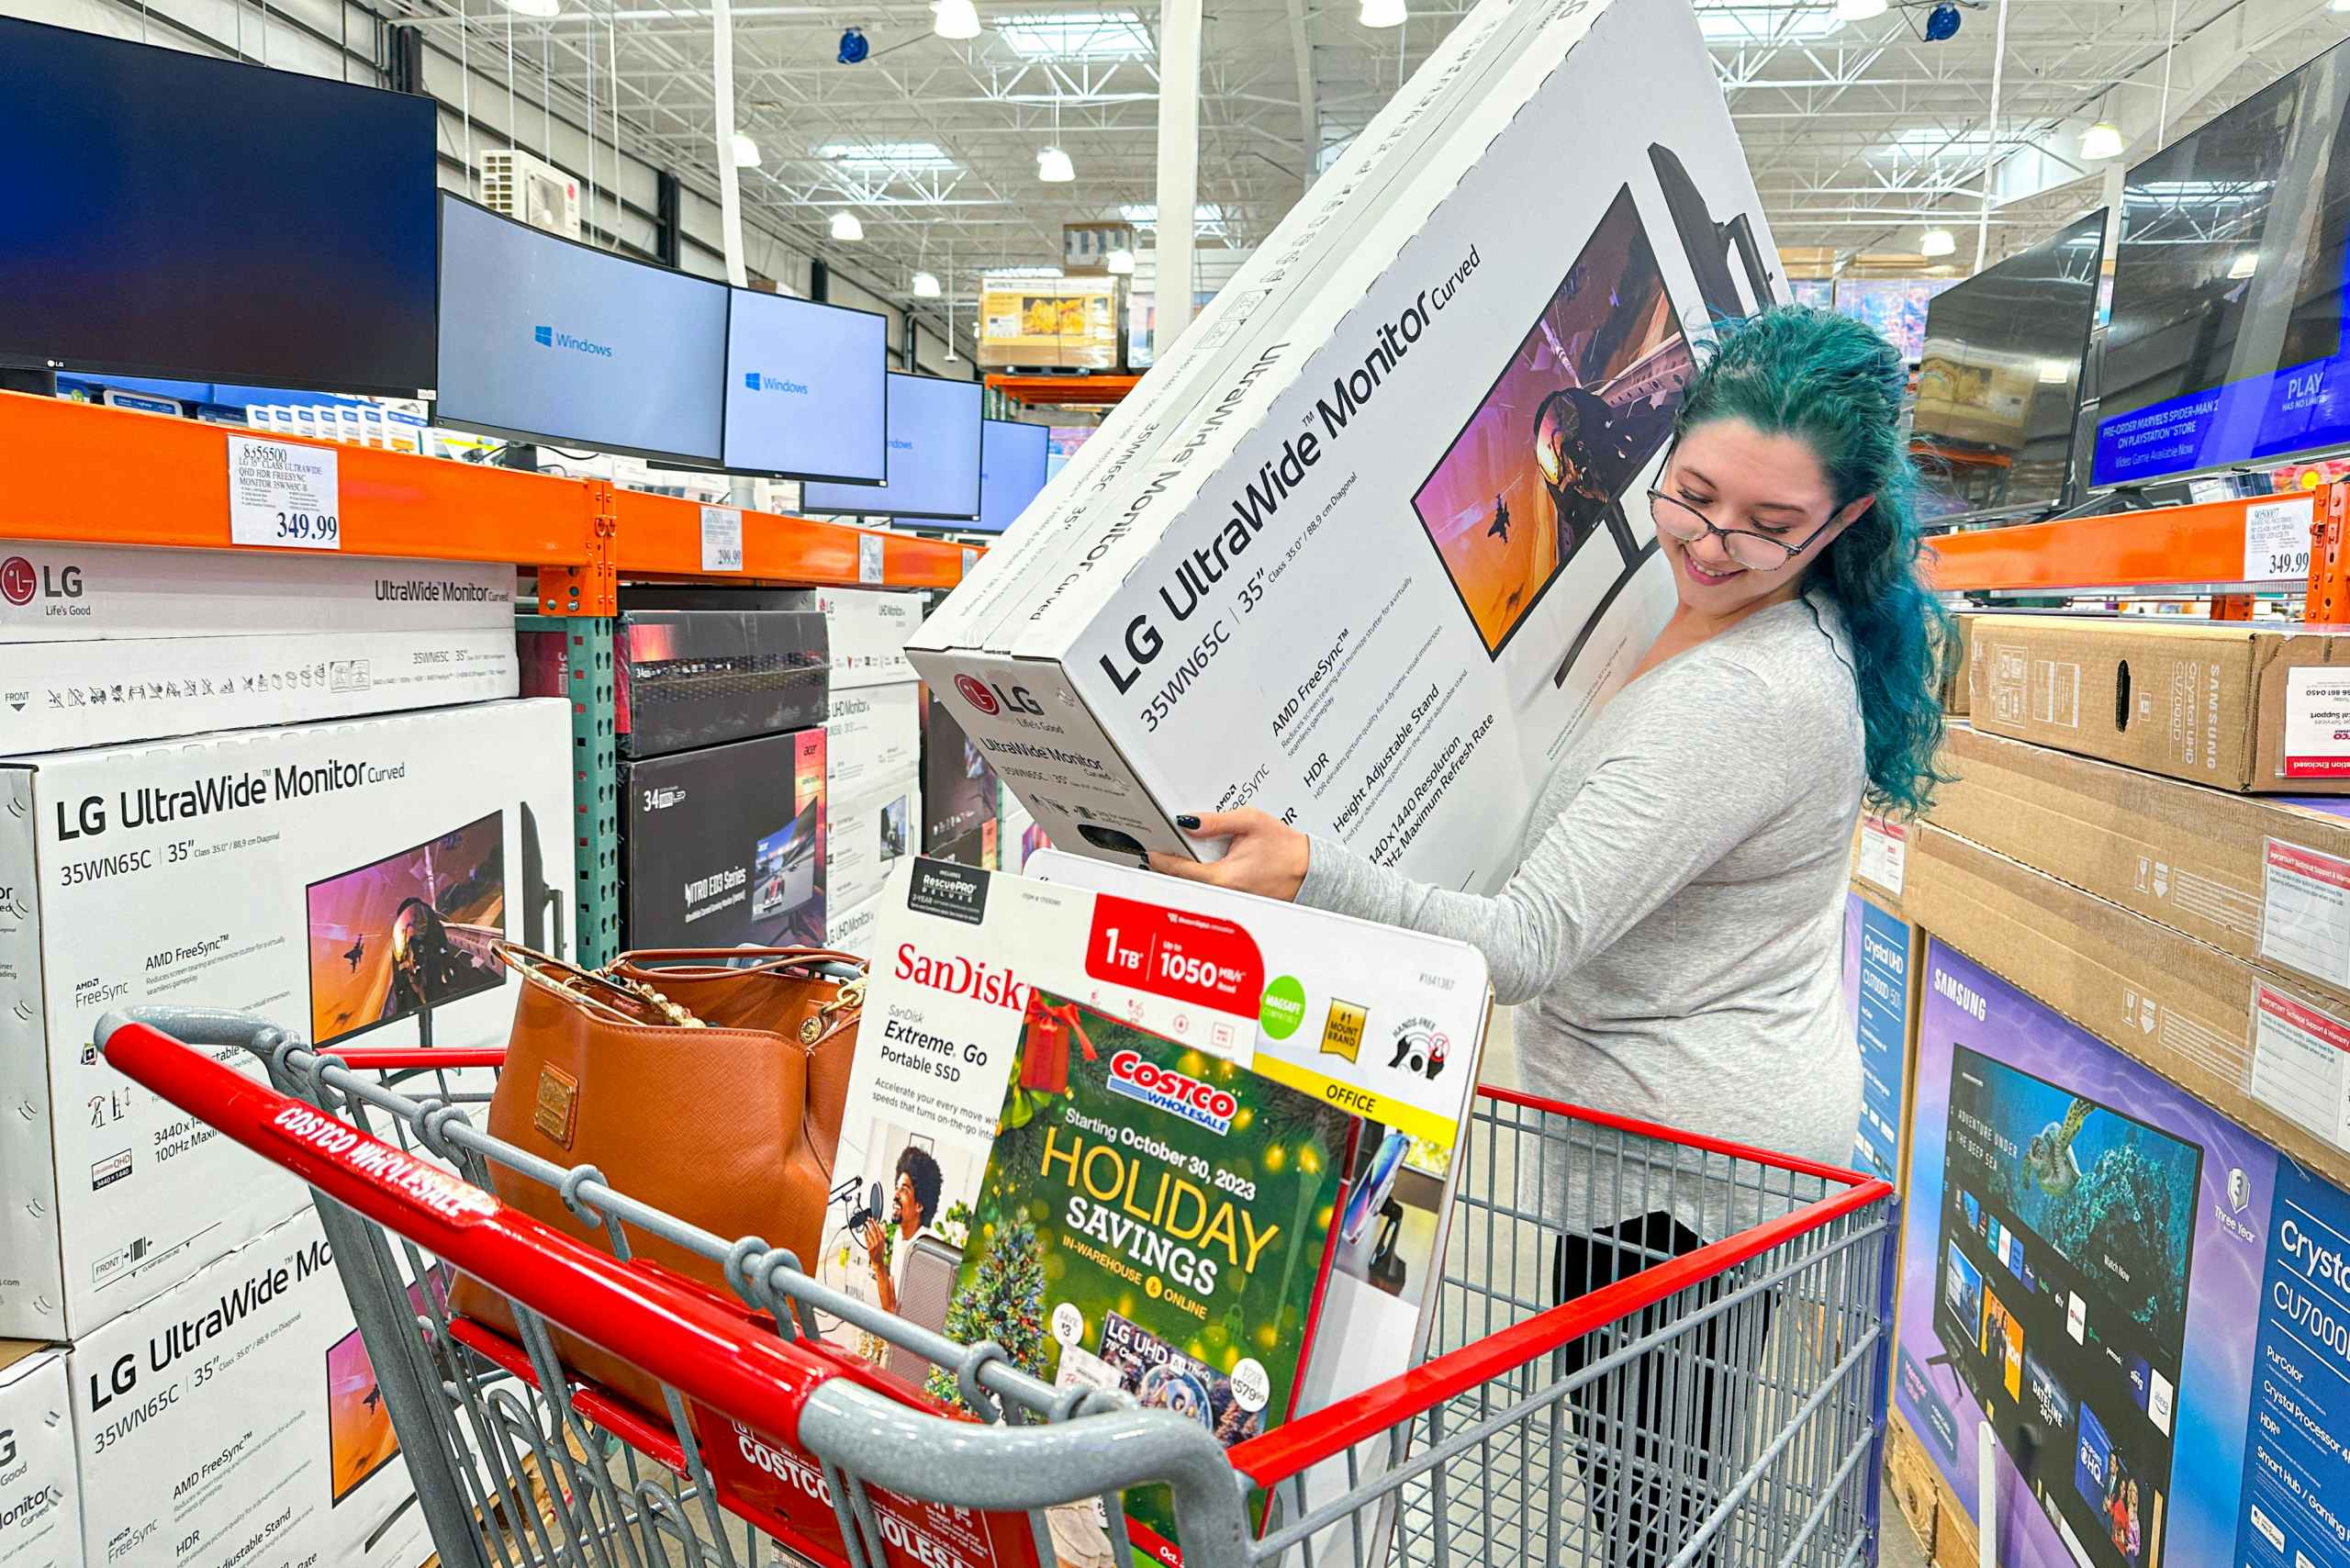 https://prod-cdn-thekrazycouponlady.imgix.net/wp-content/uploads/2019/10/costco-black-friday-lg-monitor-kcl-model-1-1698423493-1698423494-scaled-e1703108387680.jpg?auto=format&fit=fill&q=25